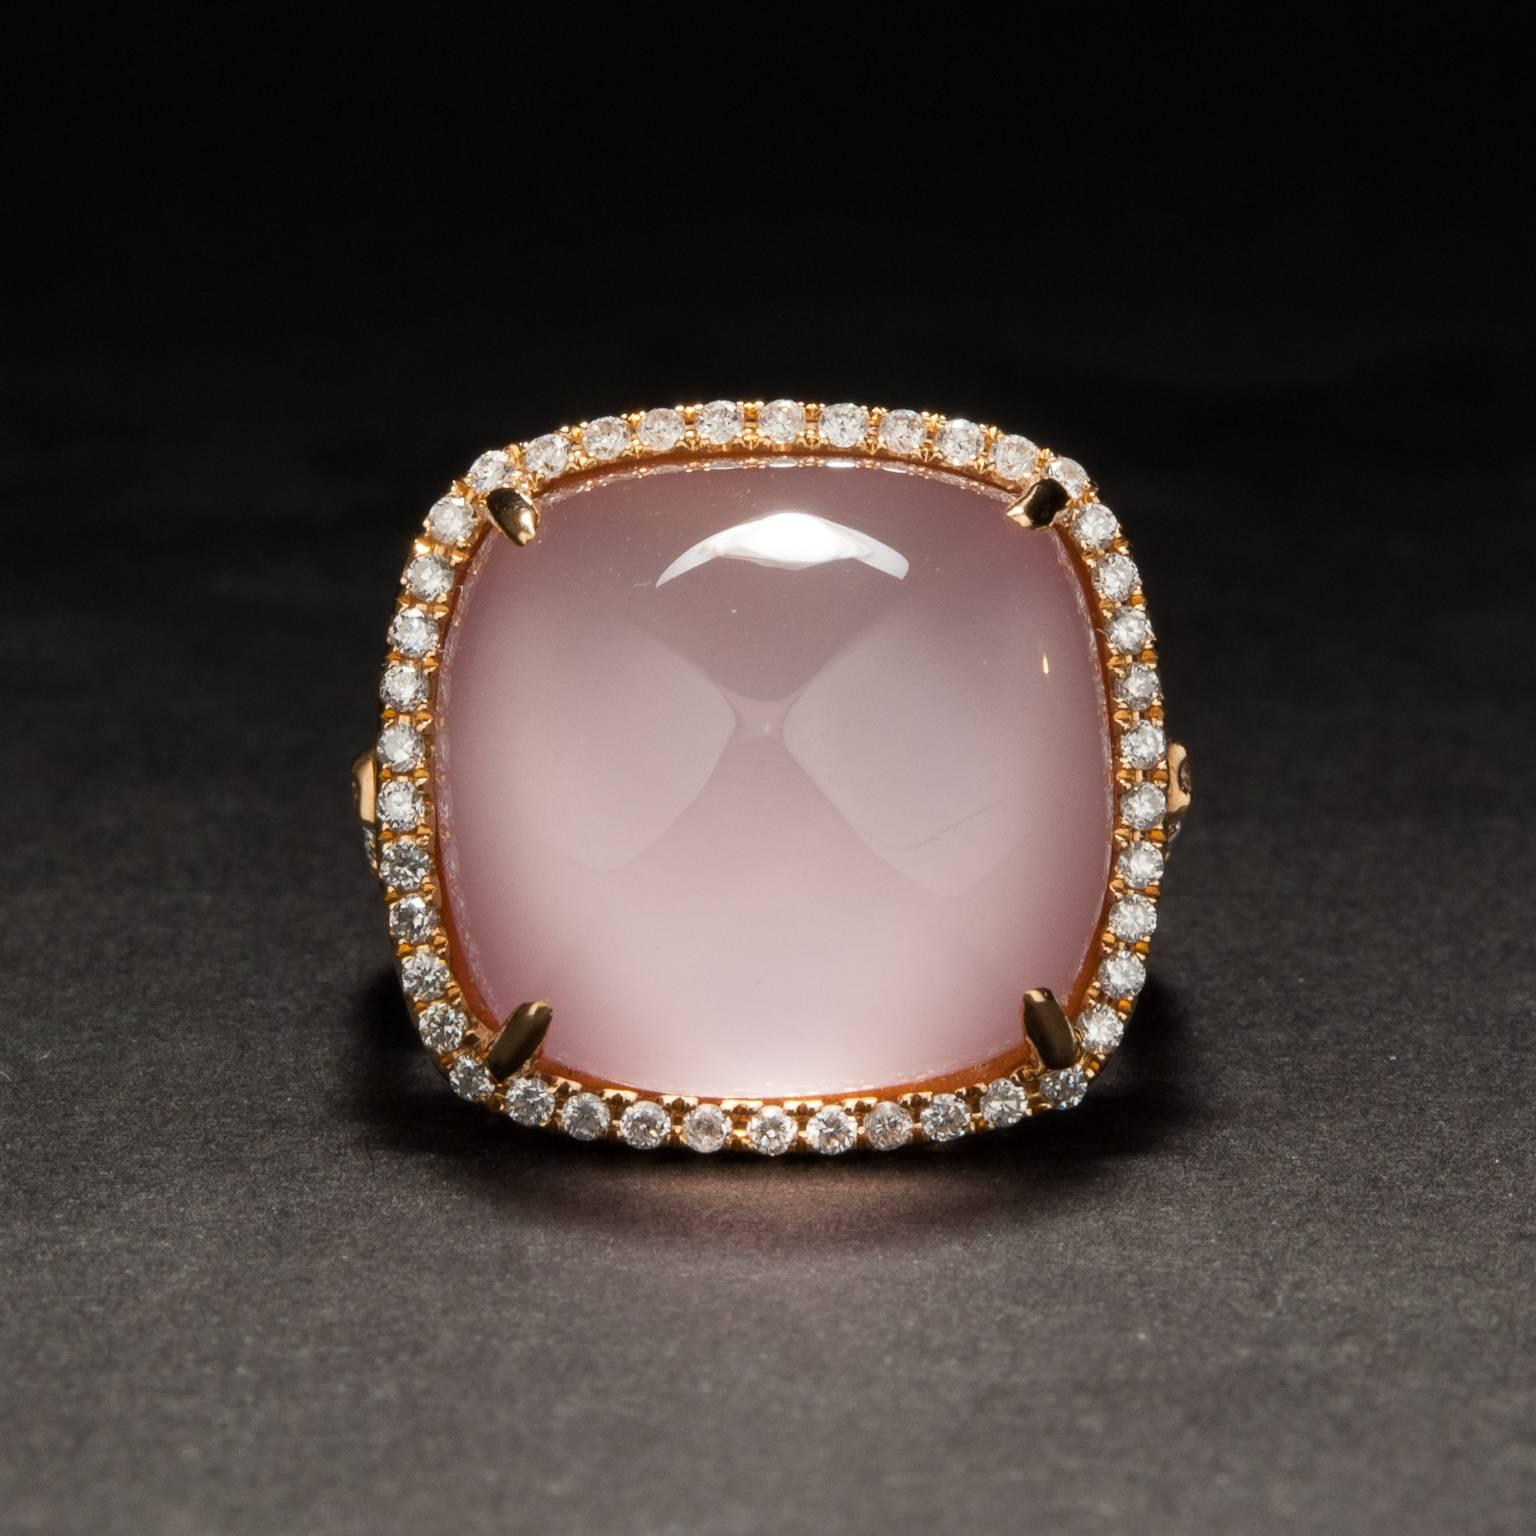 This lovely doublet ring features a large cabochon cut rose quartz over a layer of beautiful pink mother-of-pearl. The ring is made in 18k rose gold and features .56 total carats of bright white accent diamonds.  